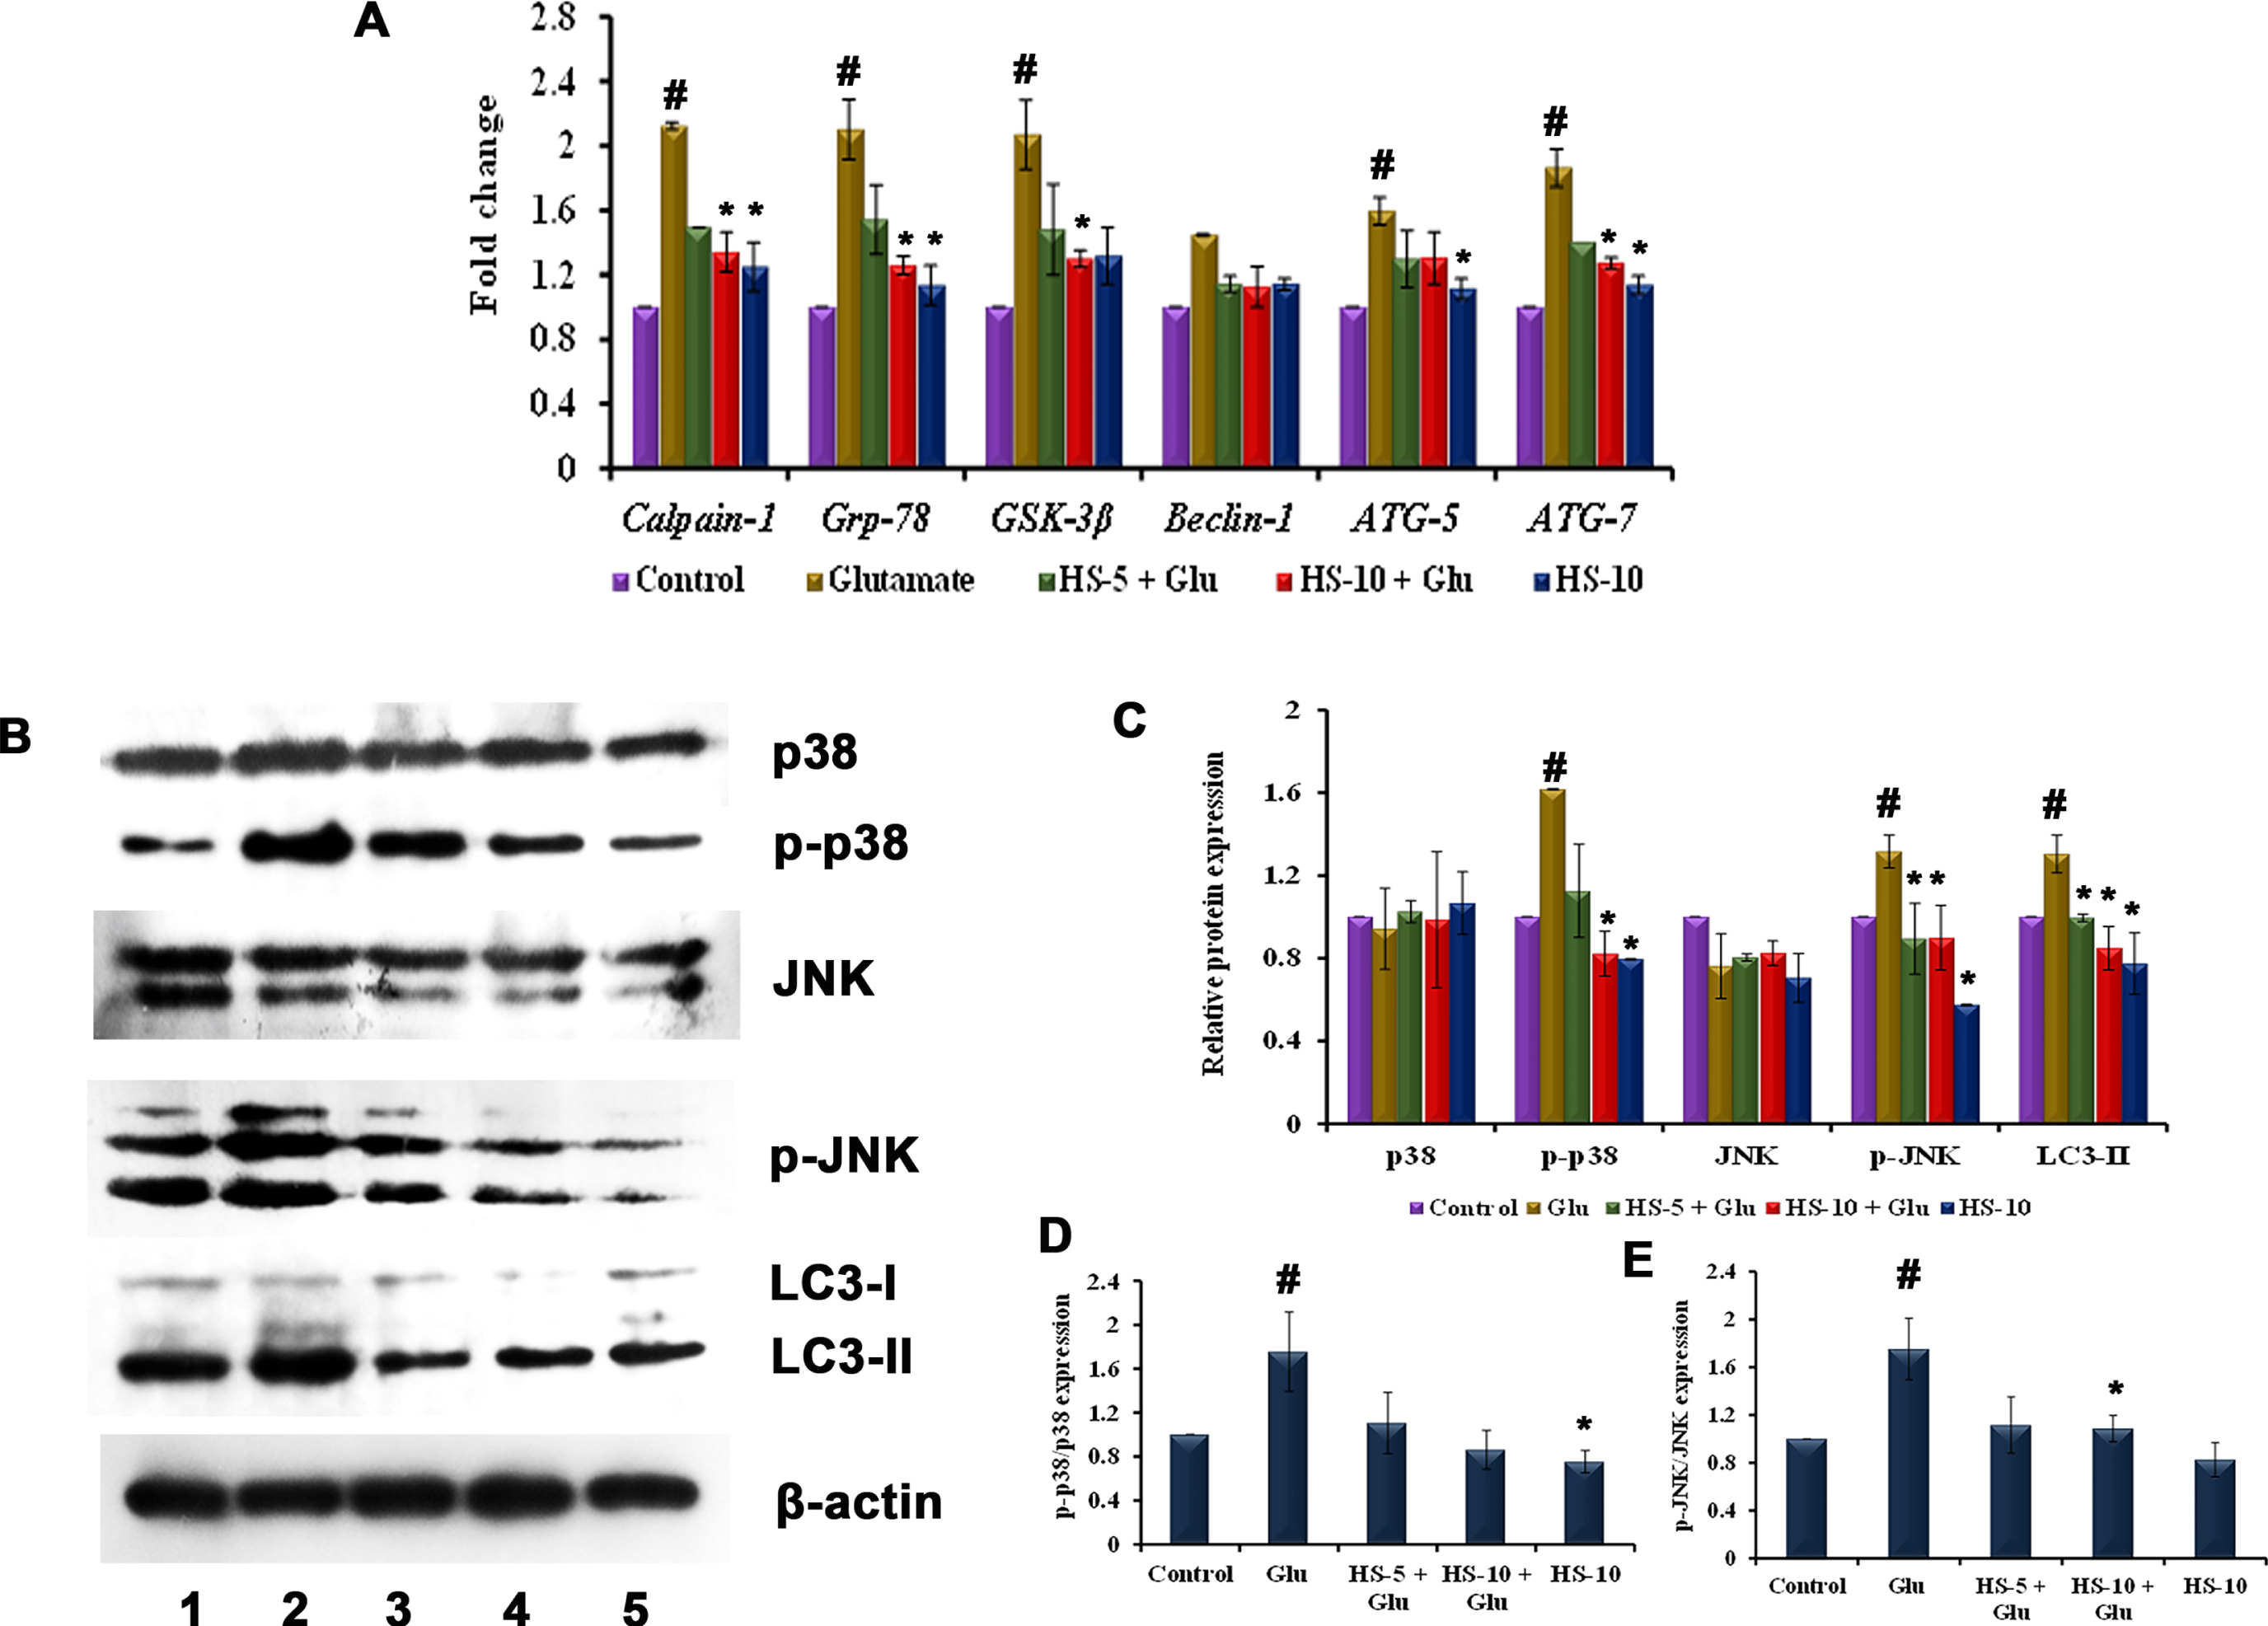 (A) Transcriptional regulation of ER stress, autophagy-associated genes by HS (B) Western blot analysis of proteins involved in MAPK (p38/p-p38, JNK/p-JNK) pathway and autophagy (LC3-II) (Lane: 1- Control; 2- Glutamate; 3- HS-5 + Glutamate; 4- HS-10 + Glutamate; 5- HS-10) (C) Quantification of relative expression of proteins involved in MAPK (p38/p-p38, JNK/p-JNK) pathway and autophagy (LC3-II) (D) Quantification of p-p38/p38 expression (E) Quantification of p-JNK/JNK expression (Significance at p < 0.05; # Control vs Glutamate; * Glutamate vs HS treated; n = 3).